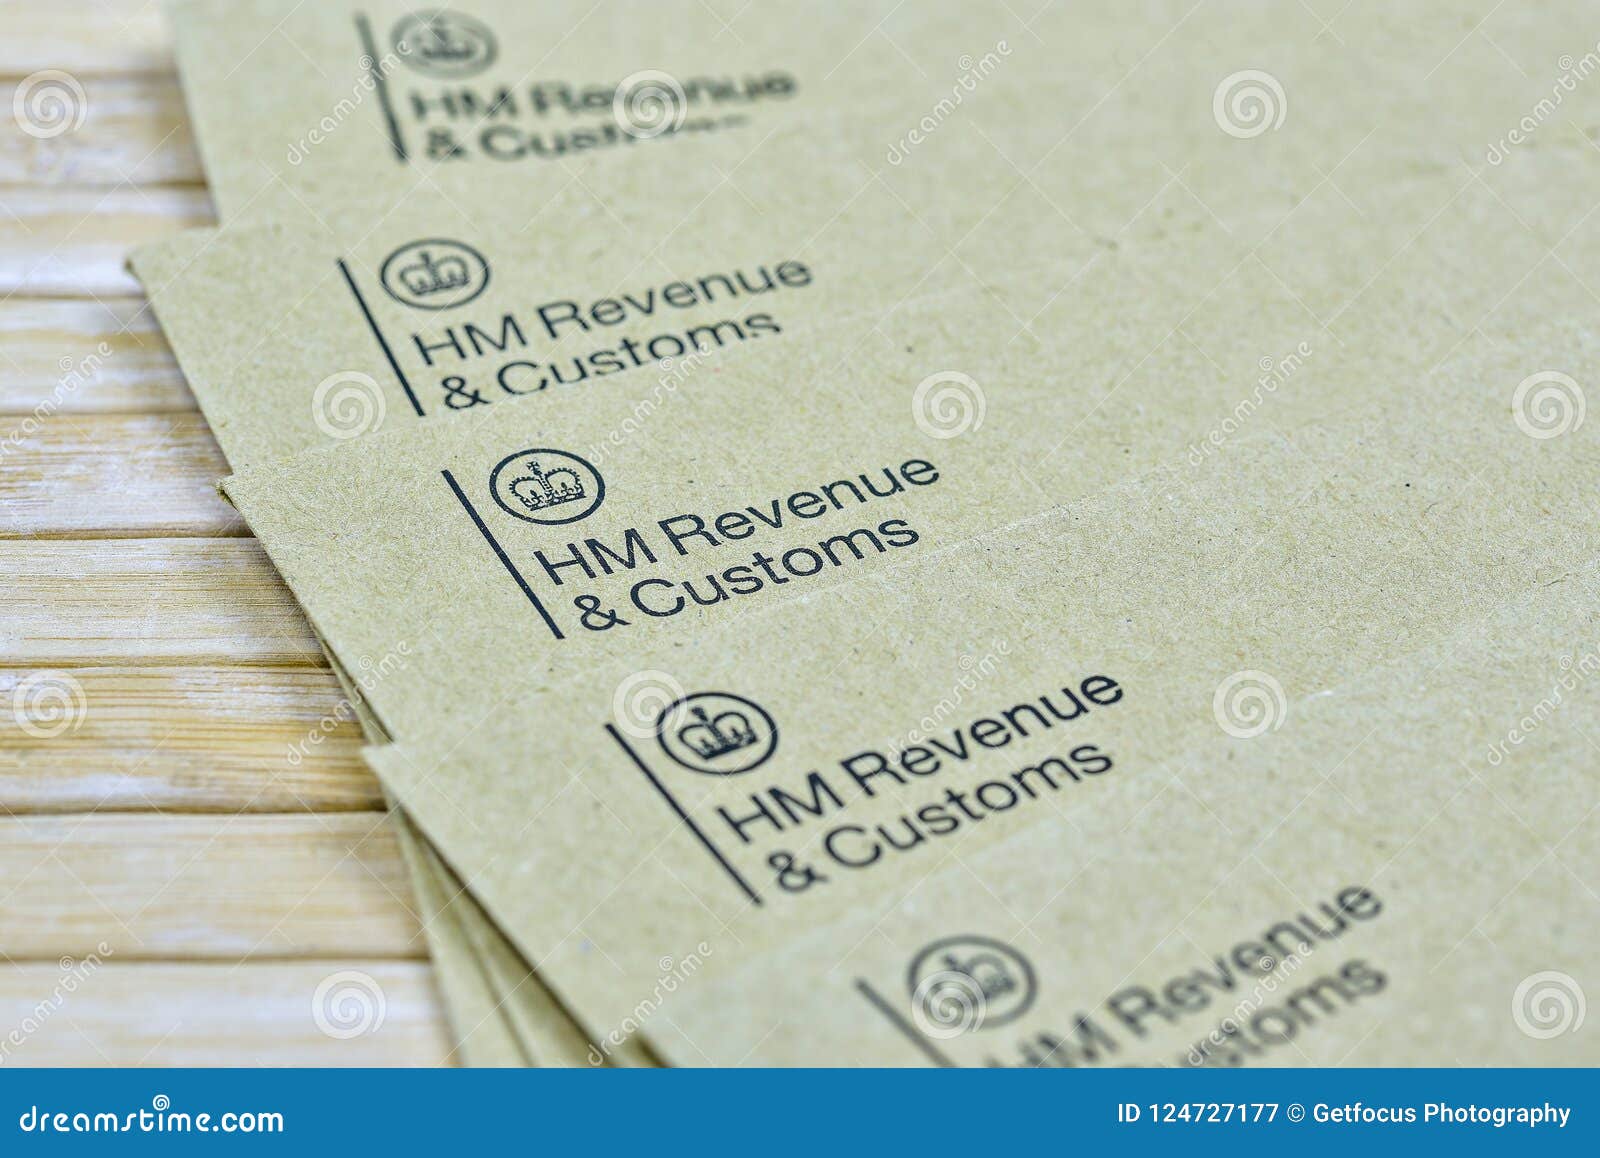 HM Revenue and Customs Envelope Editorial Photography - Image of revenue,  crown: 124727177